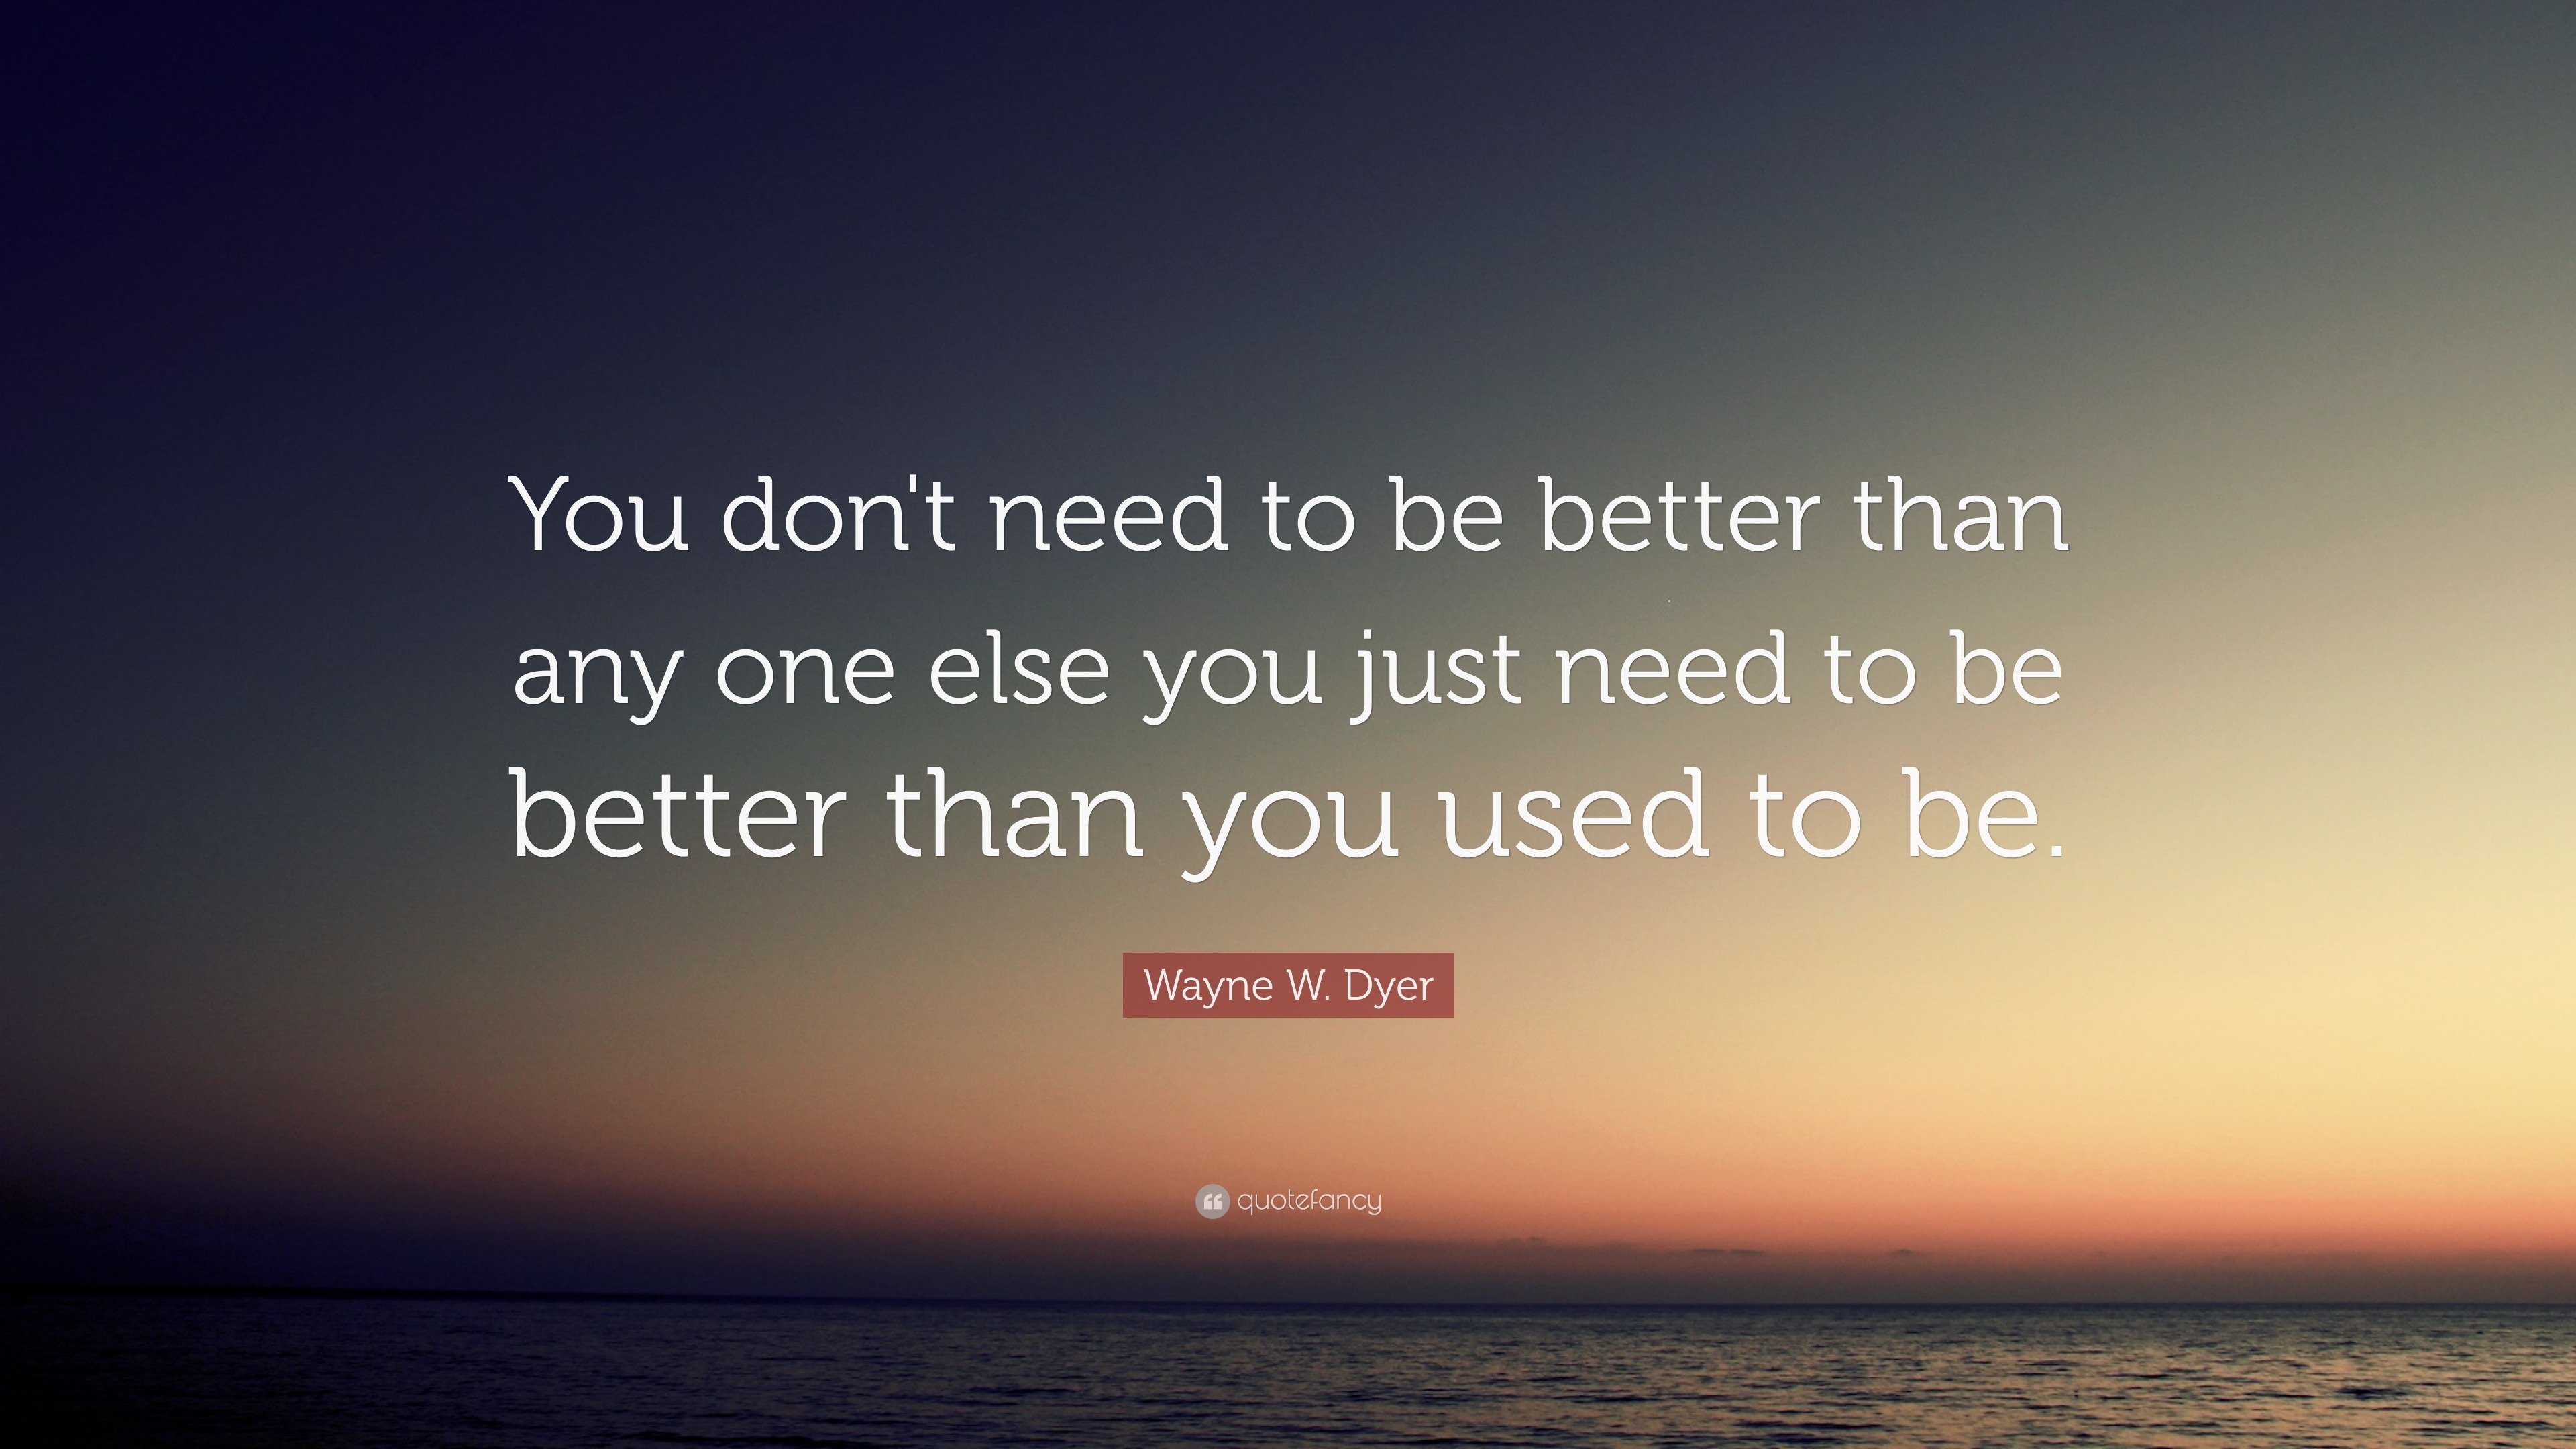 Wayne W. Dyer Quote: “You don't need to be better than any one else you ...